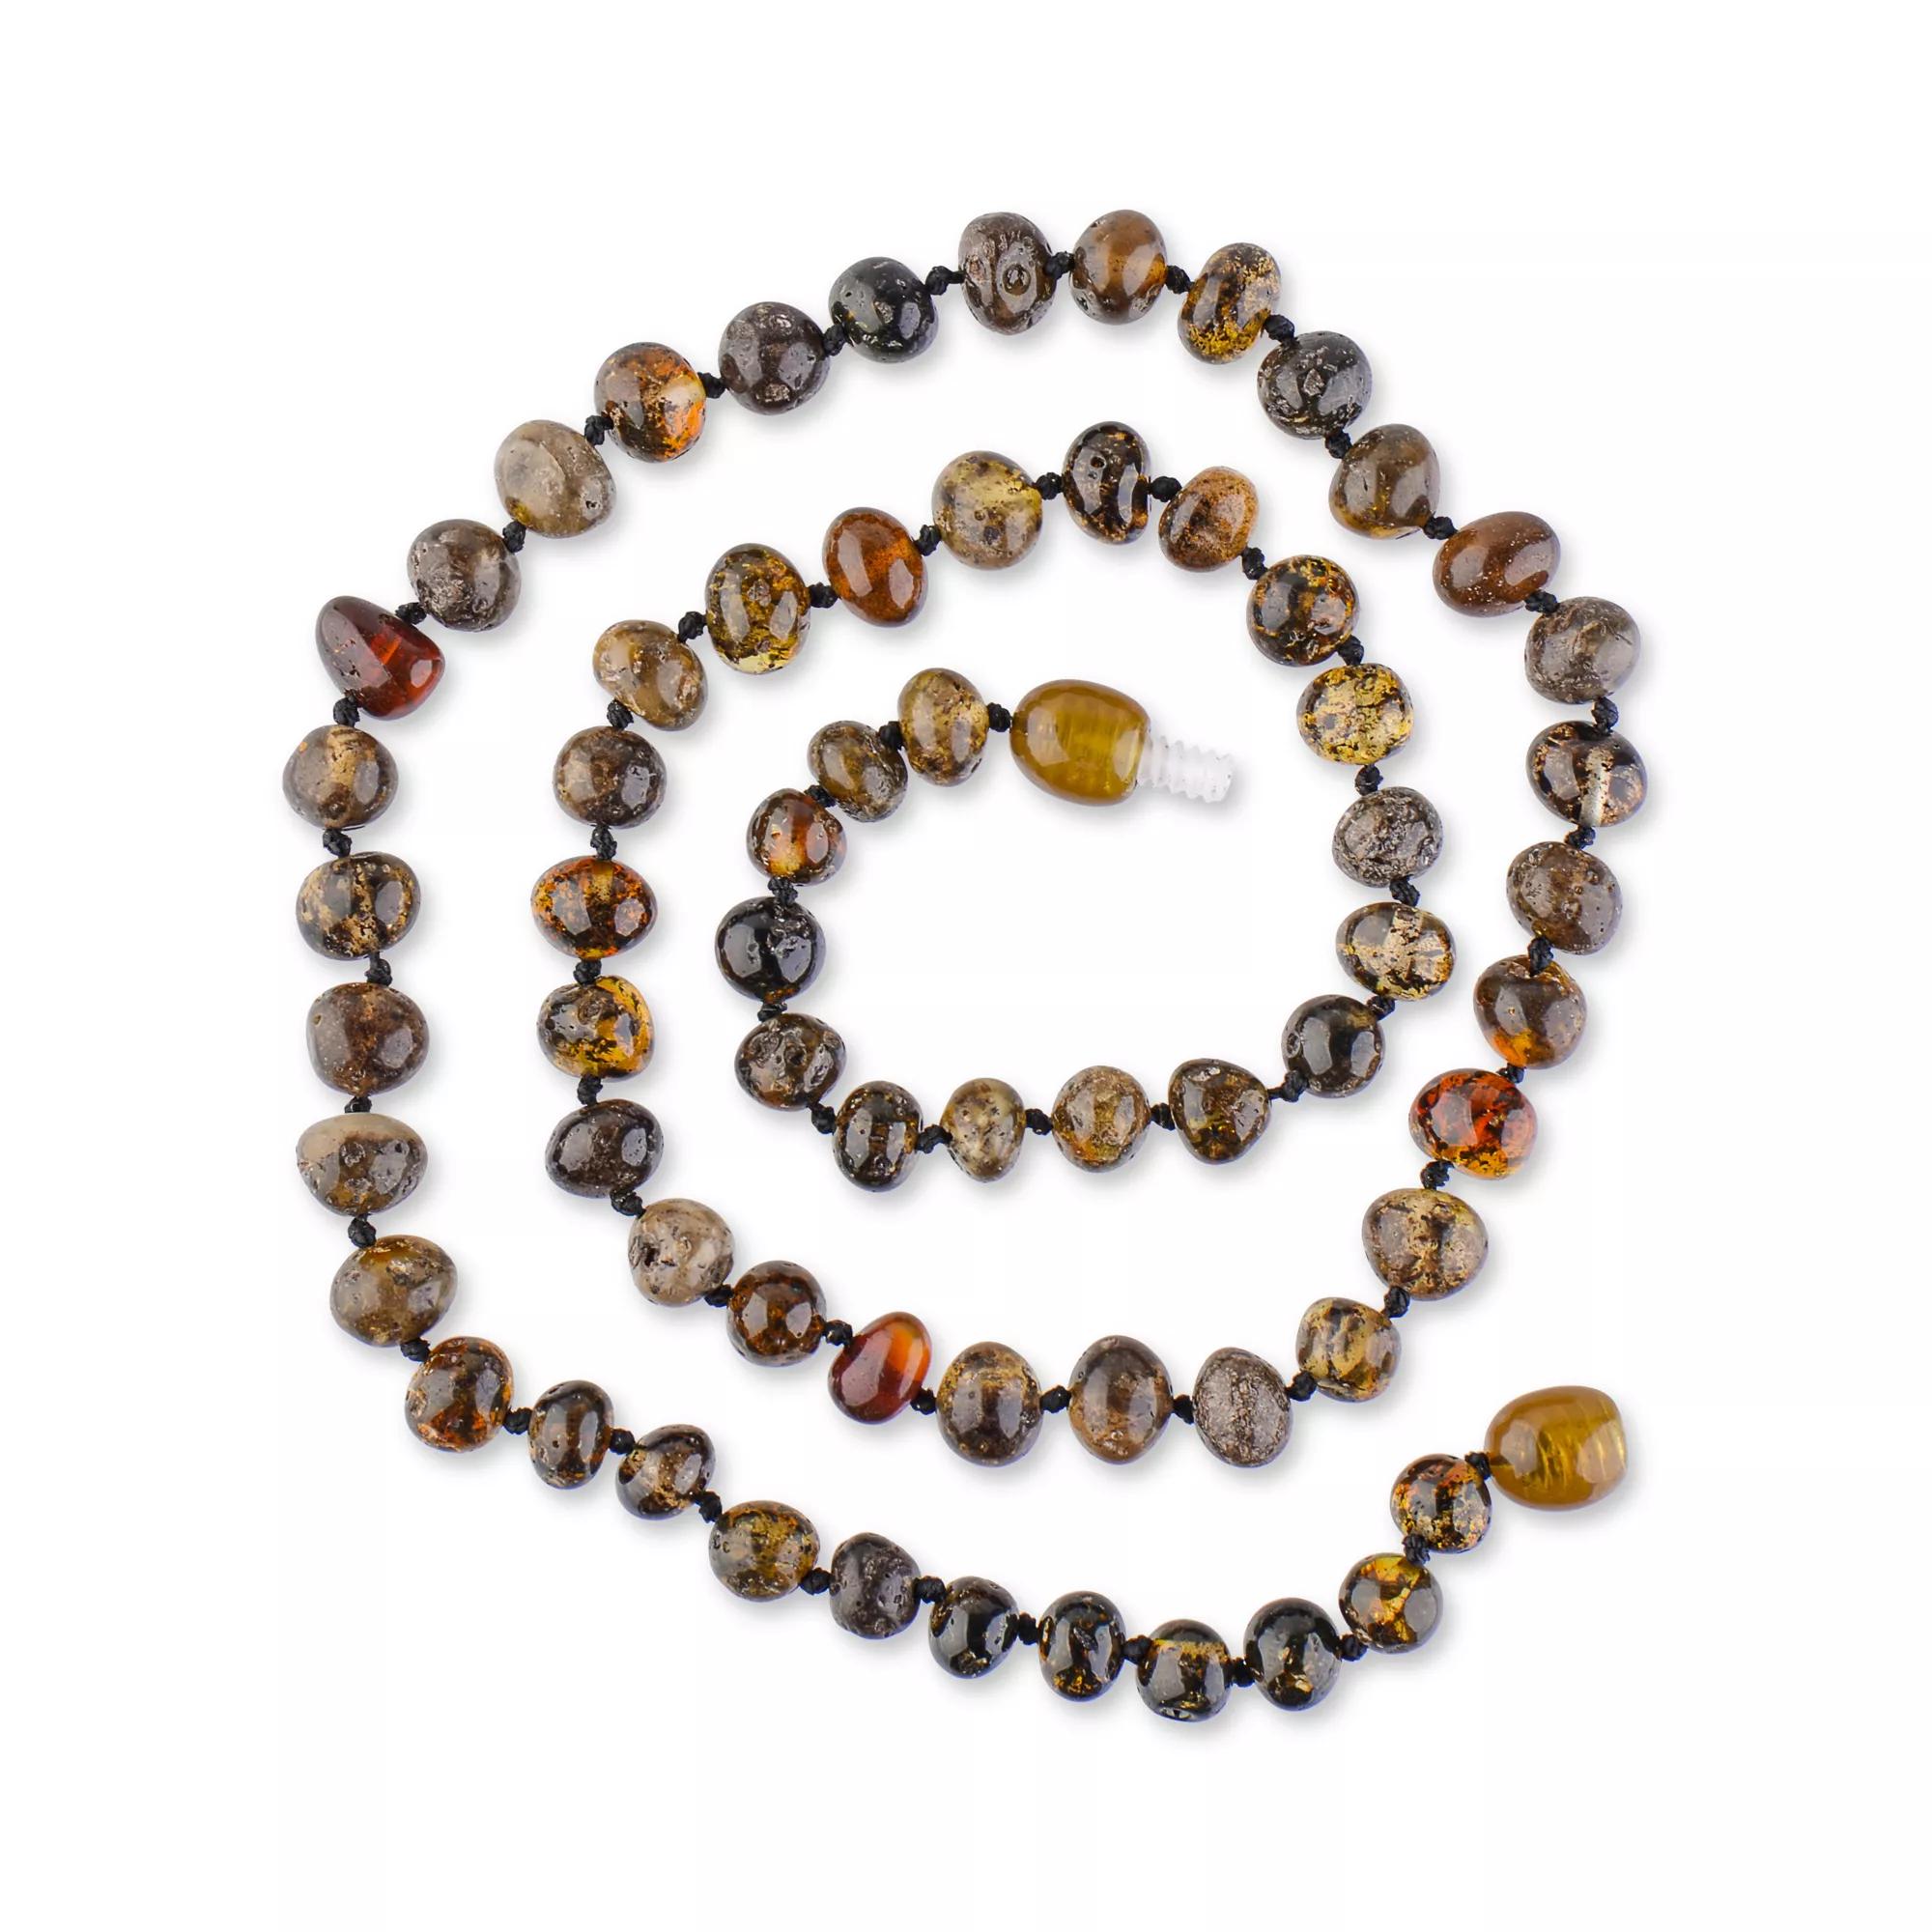 BAROQUE Baltic amber adult size necklaces